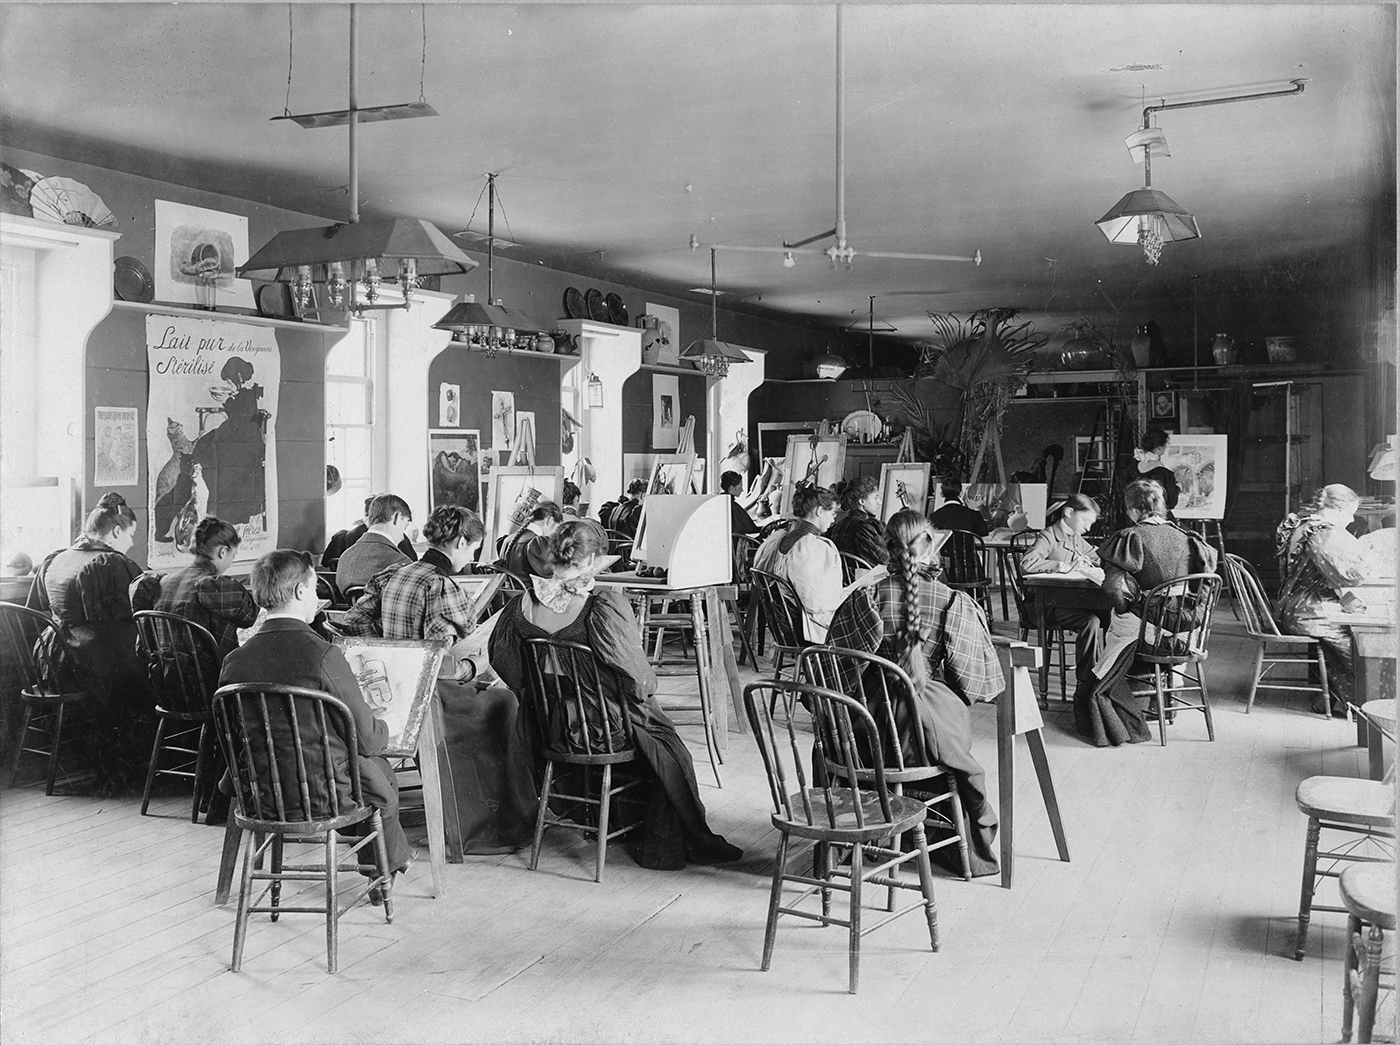 Late 1800s photograph of a classroom filled with young art students drawing from still life models.